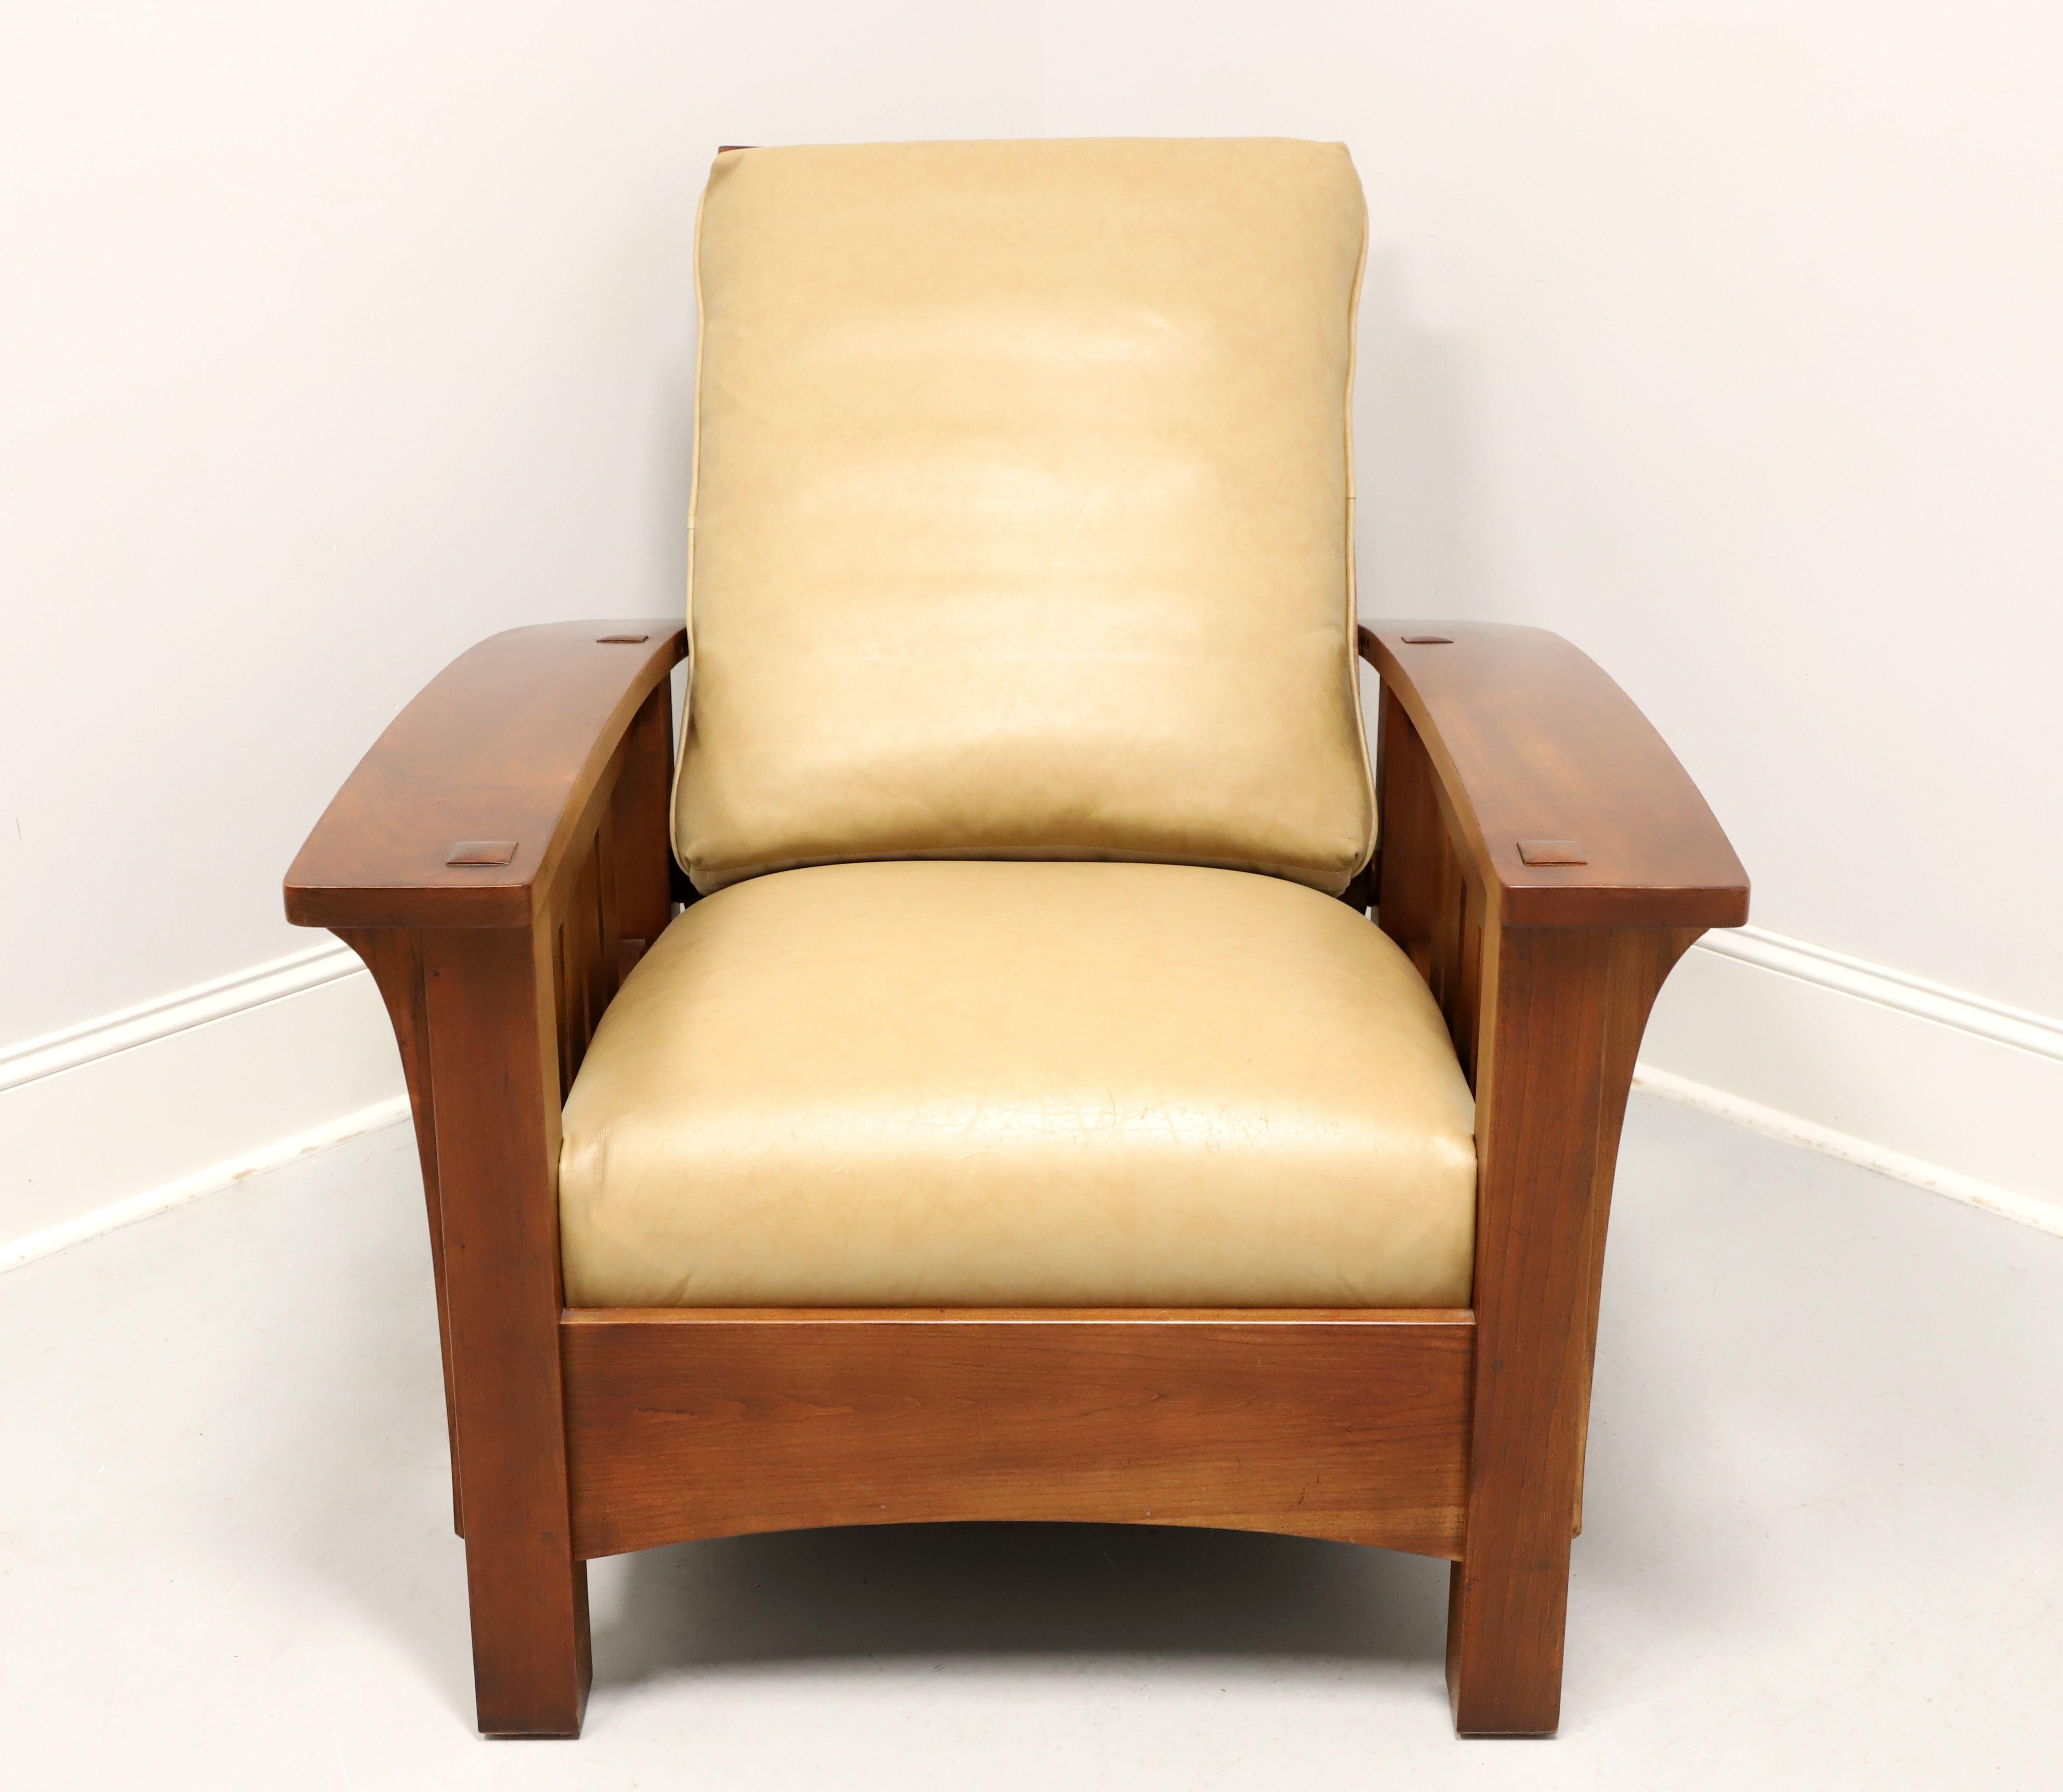 American STICKLEY Cherry & Leather Bow Arm Reclining Morris Chair 91-406 - B